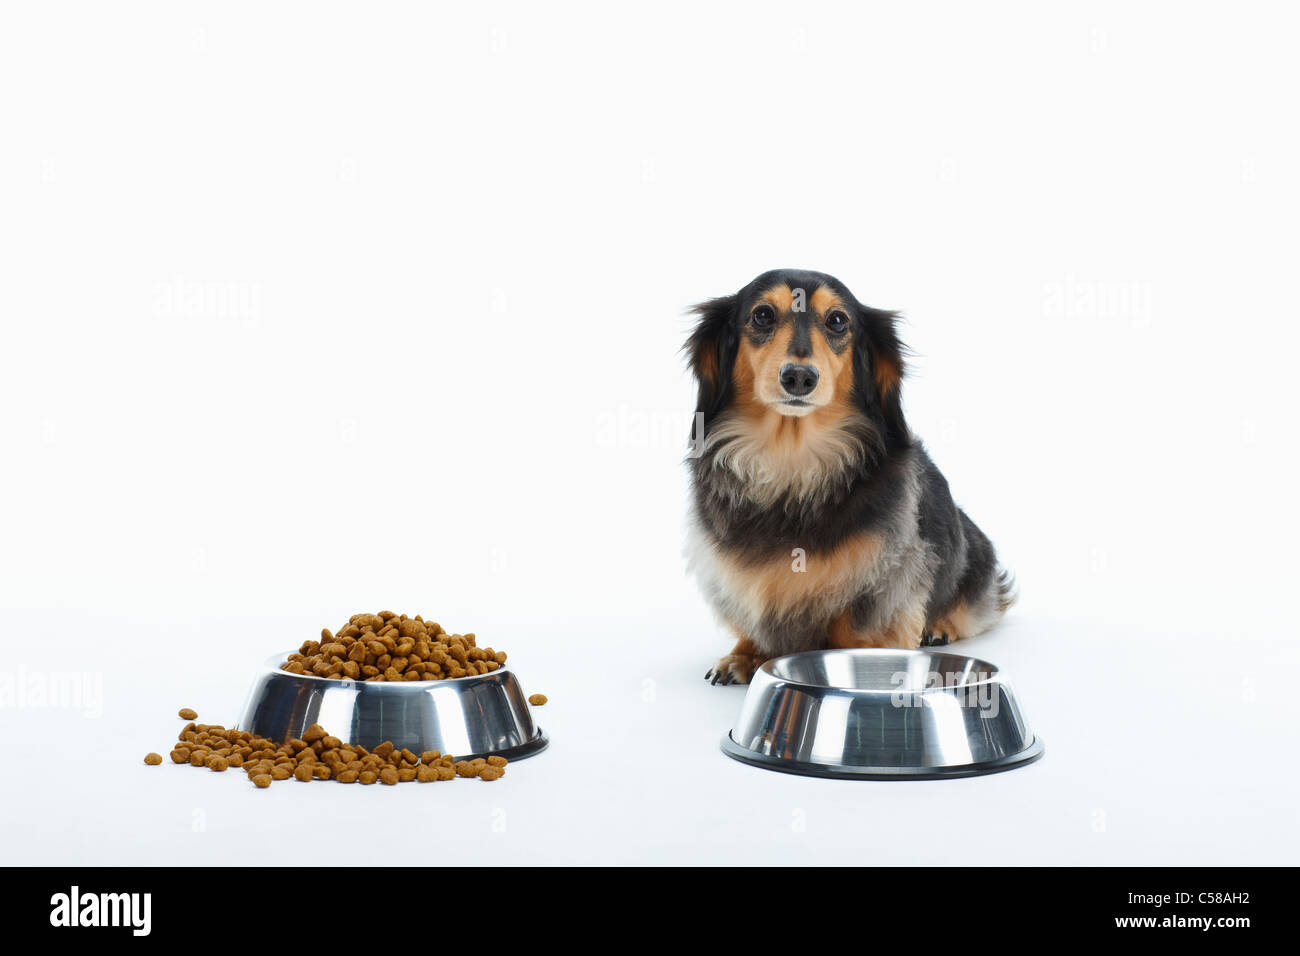 dachshund and meals Stock Photo